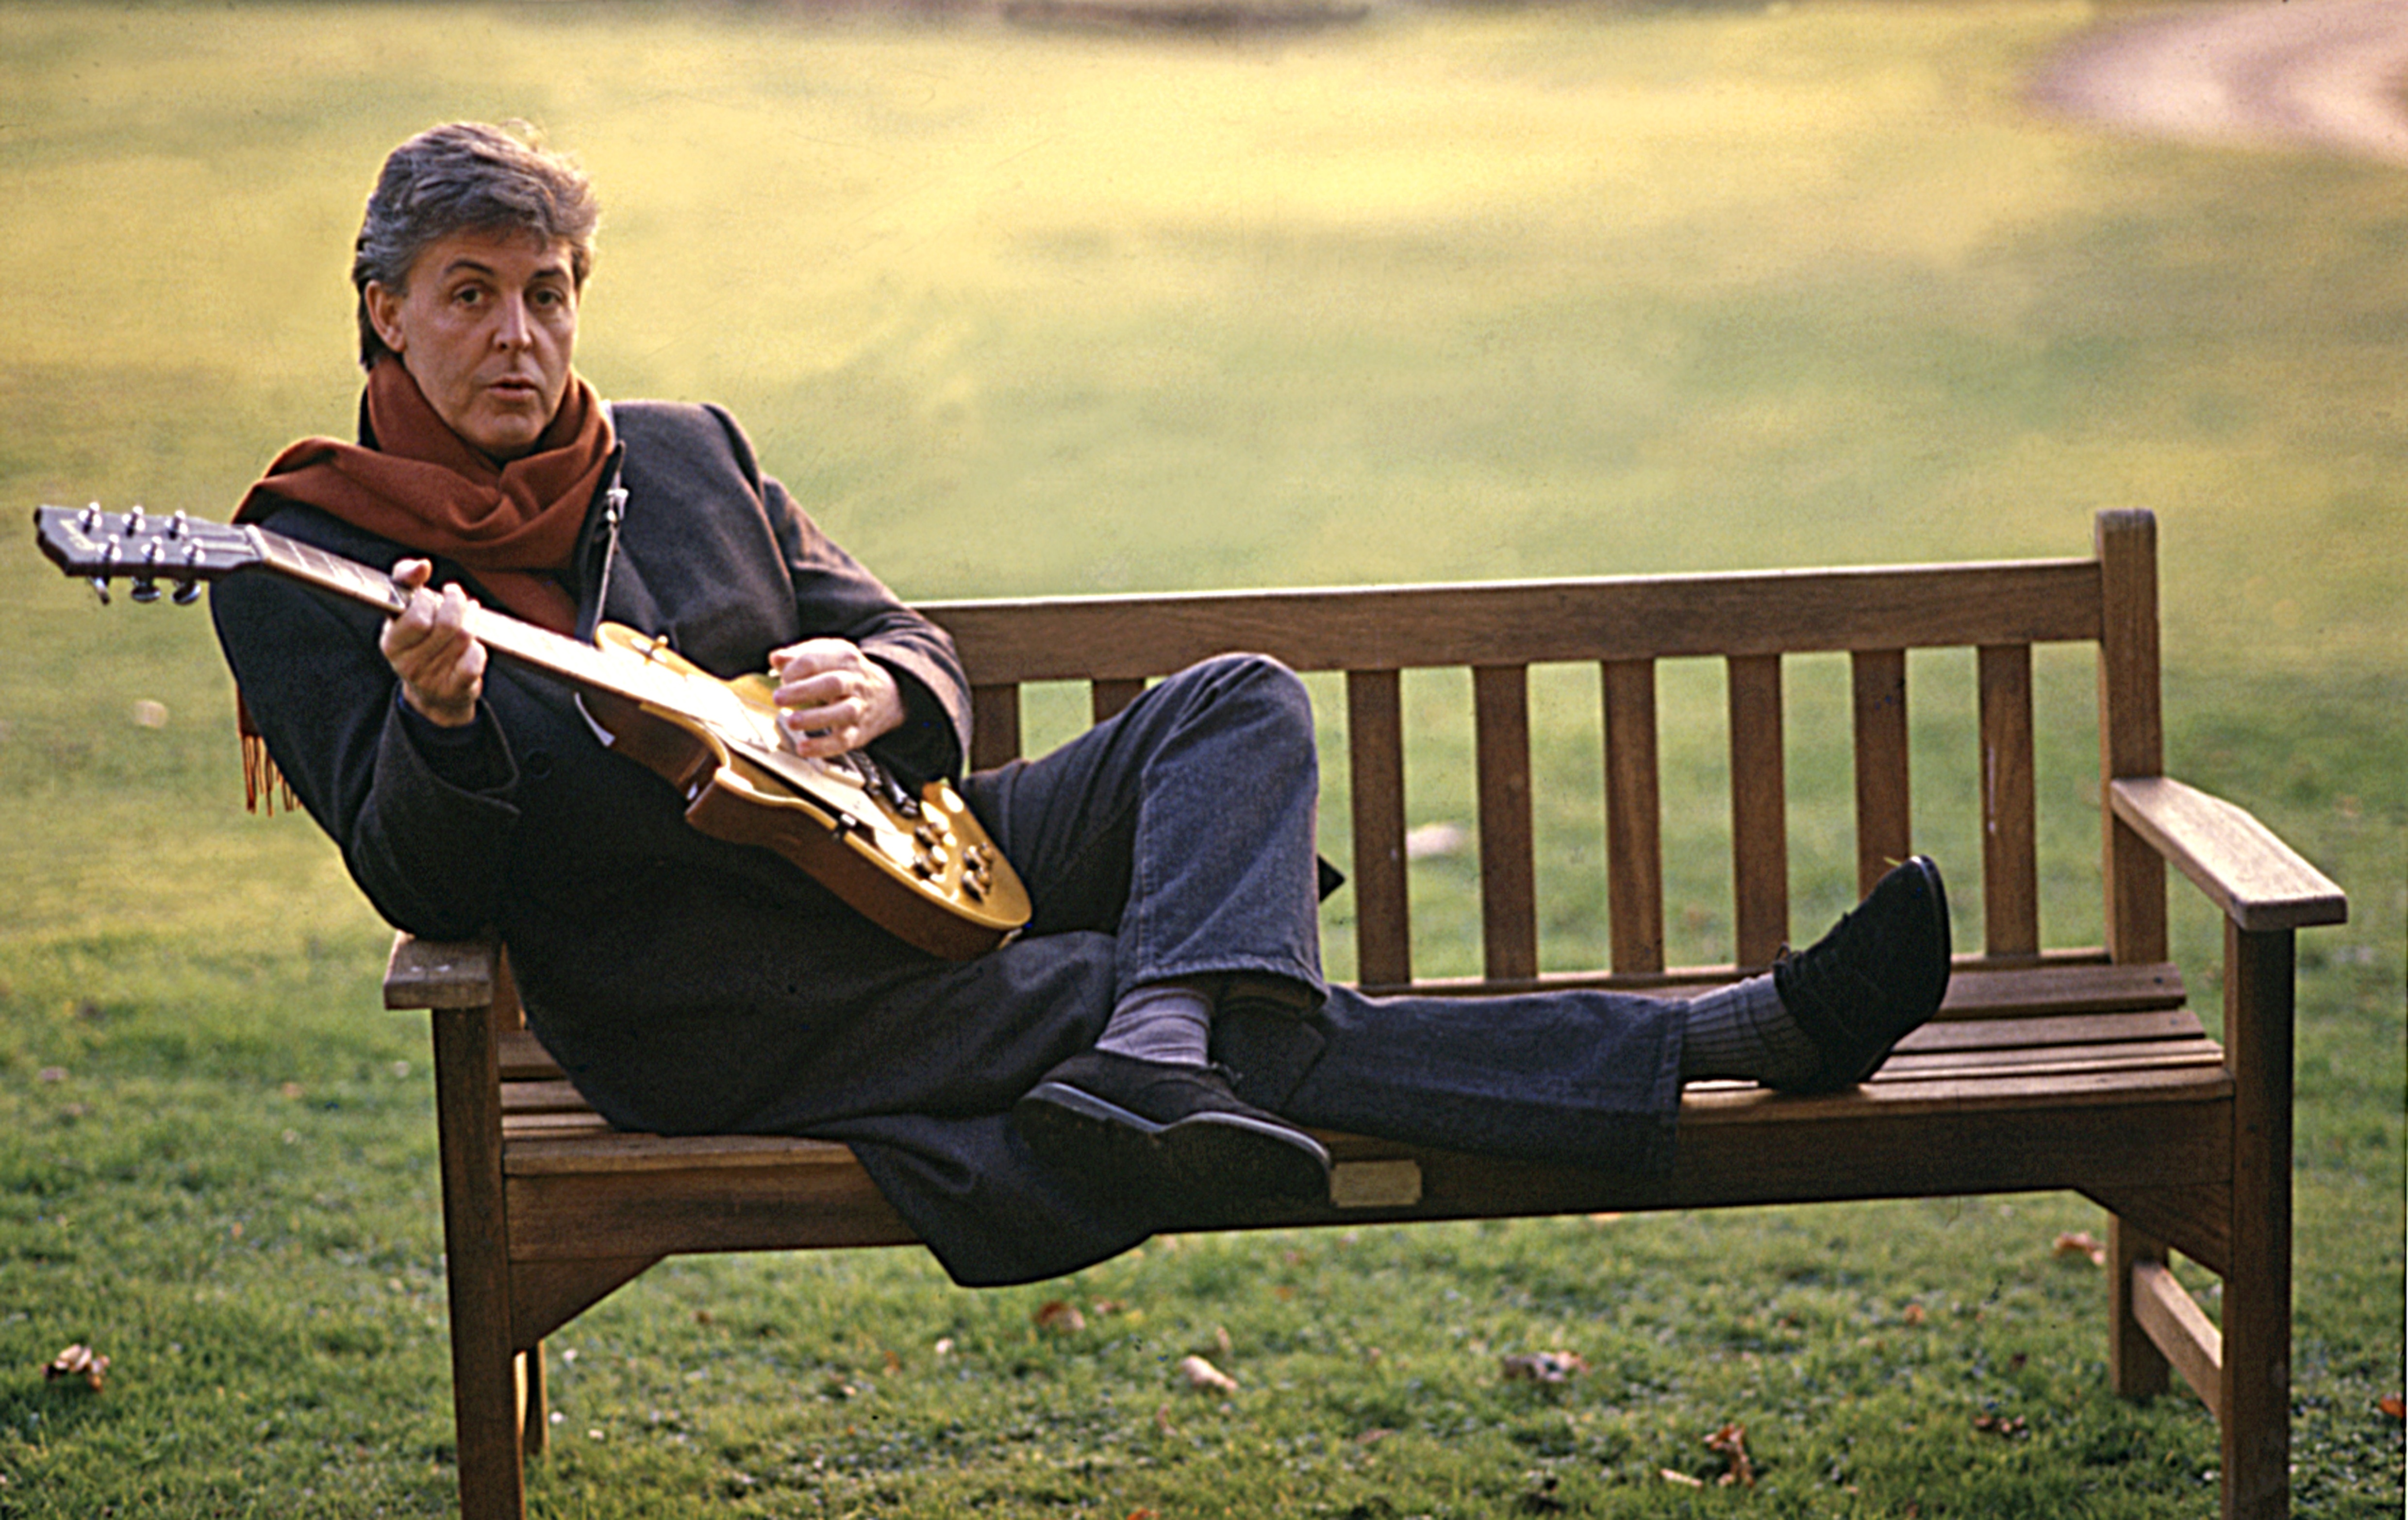 Paul McCartney sitting on a bench and playing a Gibson Les Paul guitar in 1987. | Source: Getty Images